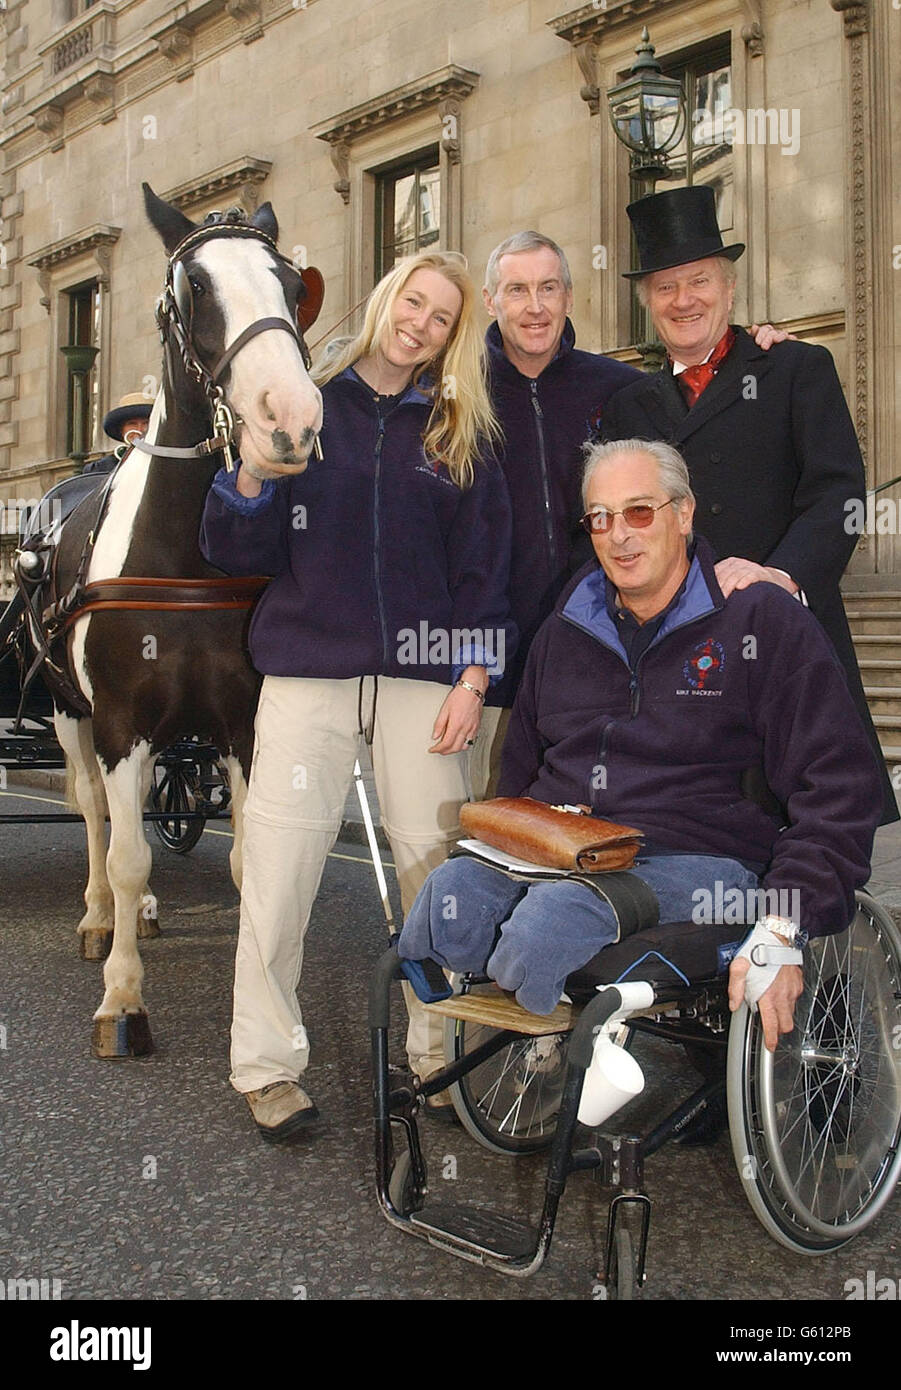 Disabled adventurers Caroline Casey from Dublin who is registered blind, Mike Mackenzie from Oxford who was paralysed and lost his legs in an accident in Bosnia, and Miles Hilton-Barber from Derby who is blind, * with Robin Dunseath adventure leader (dressed as Phileas Fogg) outside the Reform Club in Pall Mall. The group today began a round the world trip based on the journey of ficitional character Phileas Fogg. They will use 80 different modes of transport to complete their expedition. The group left the Reform Club by horse and carriage pulled by horse Arthur. Stock Photo